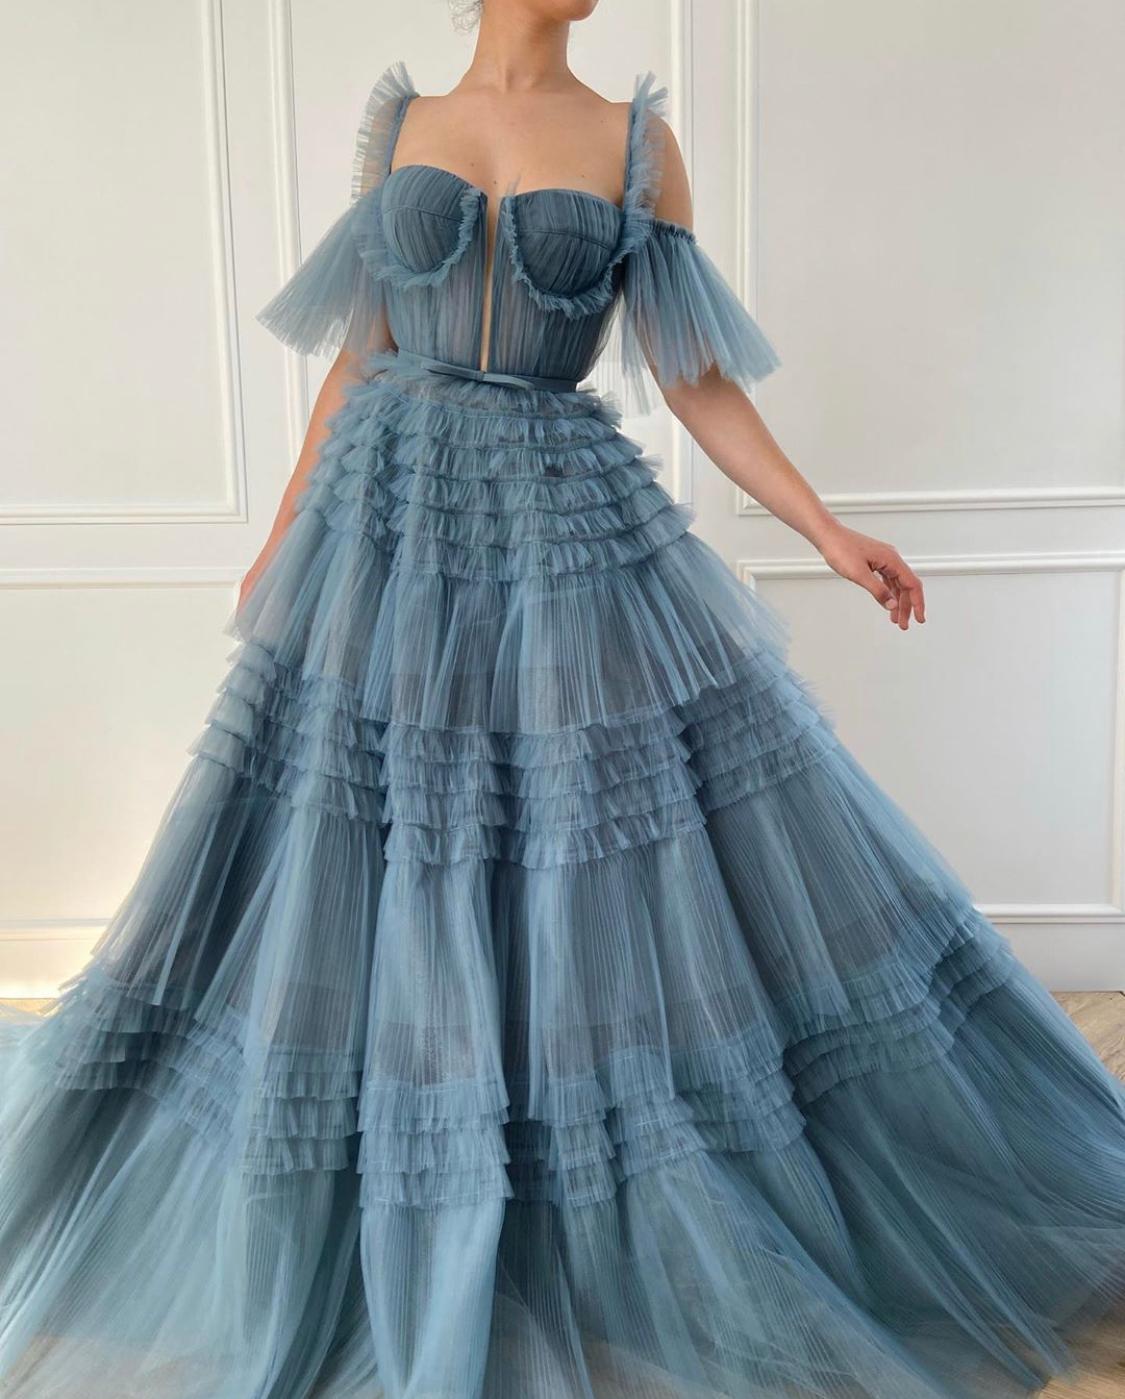 Blue A-Line dress with straps, off the shoulder sleeves and ruffles